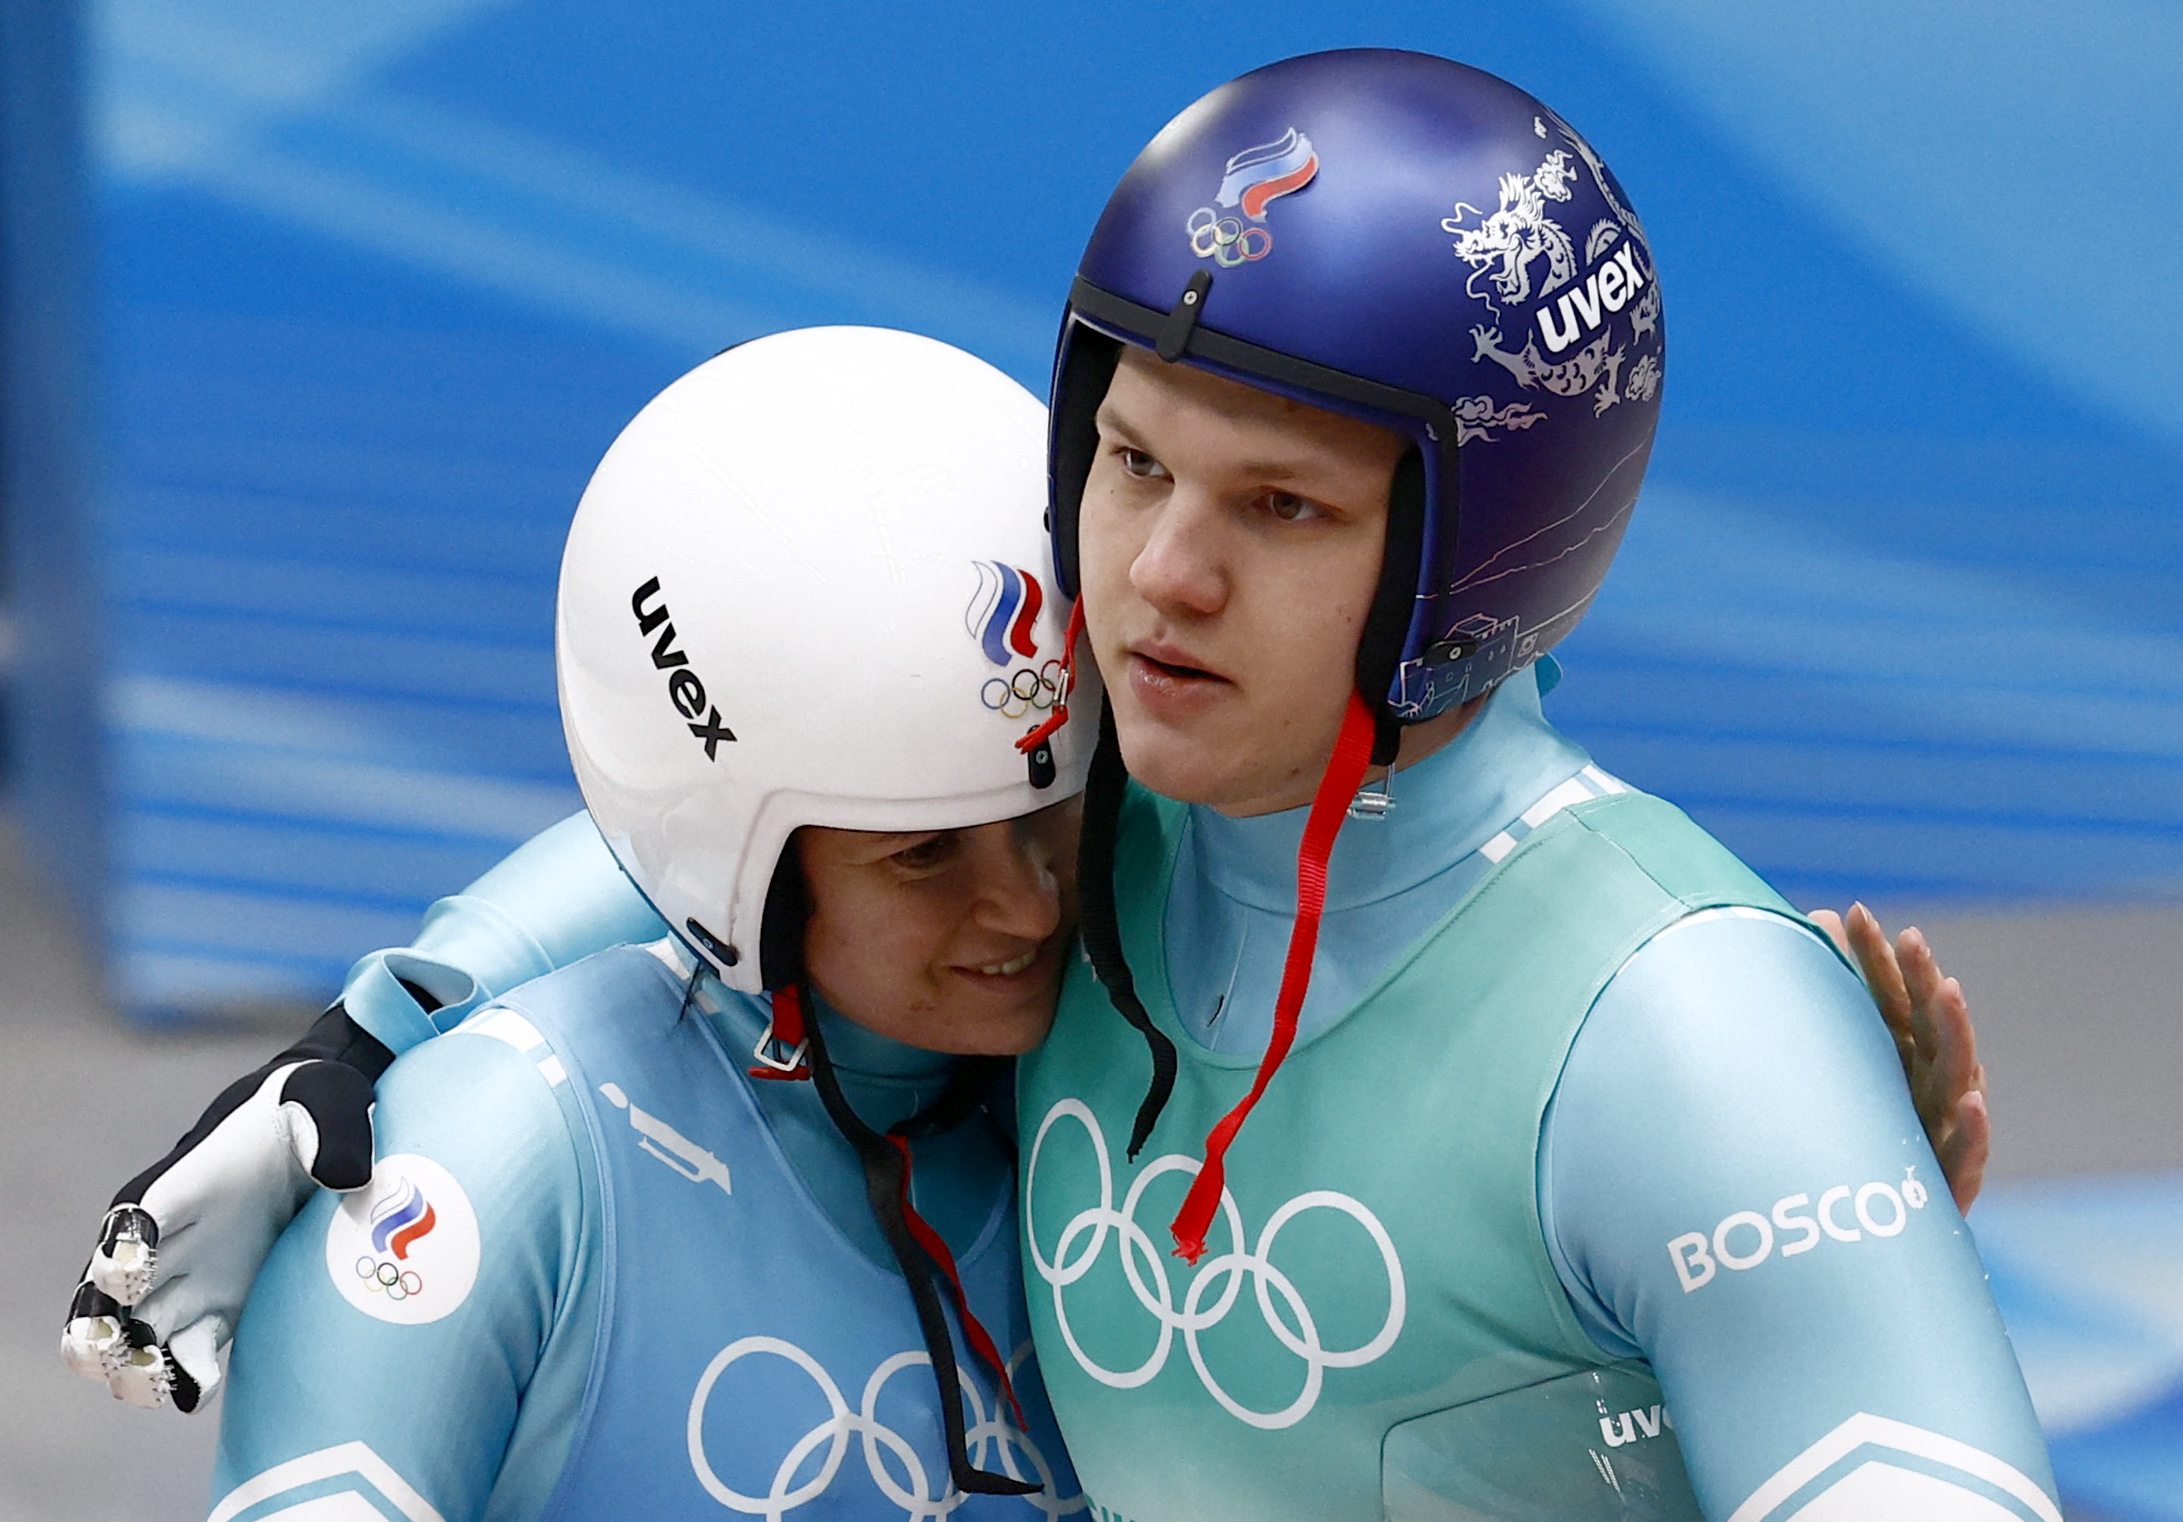 How Do You Solve A Problem Like Russia Luge Struggles To Find A Solution Following